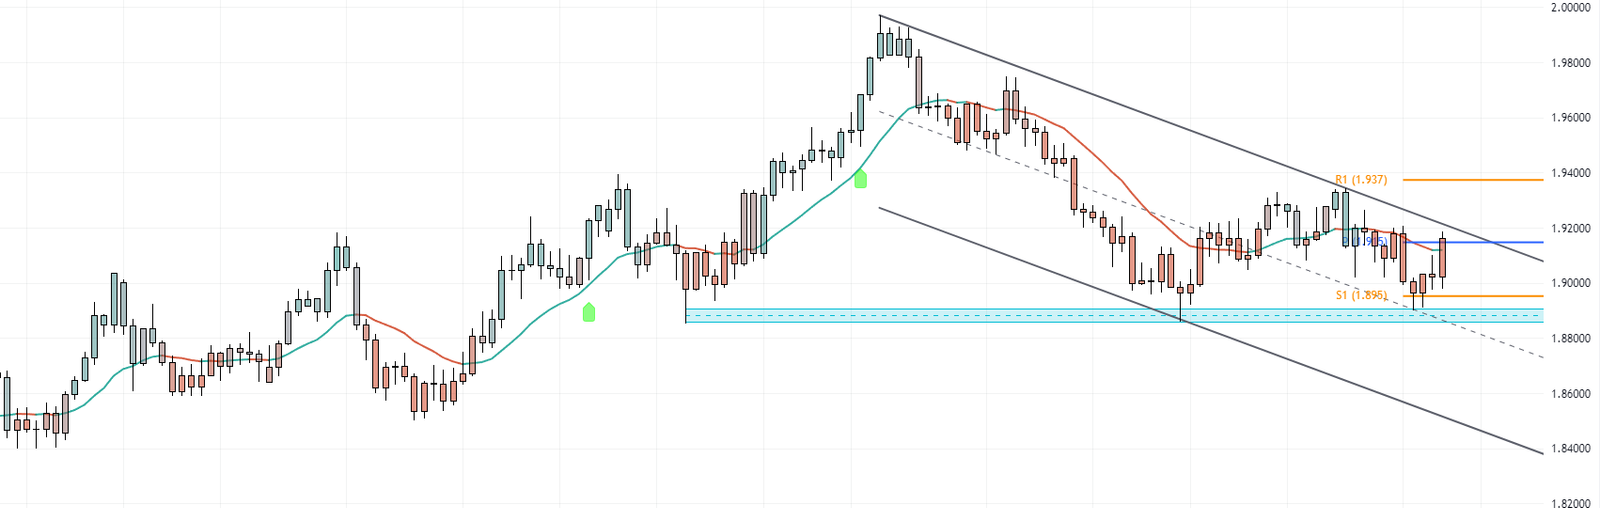 GBPAUD Forecast - Potential Reversals